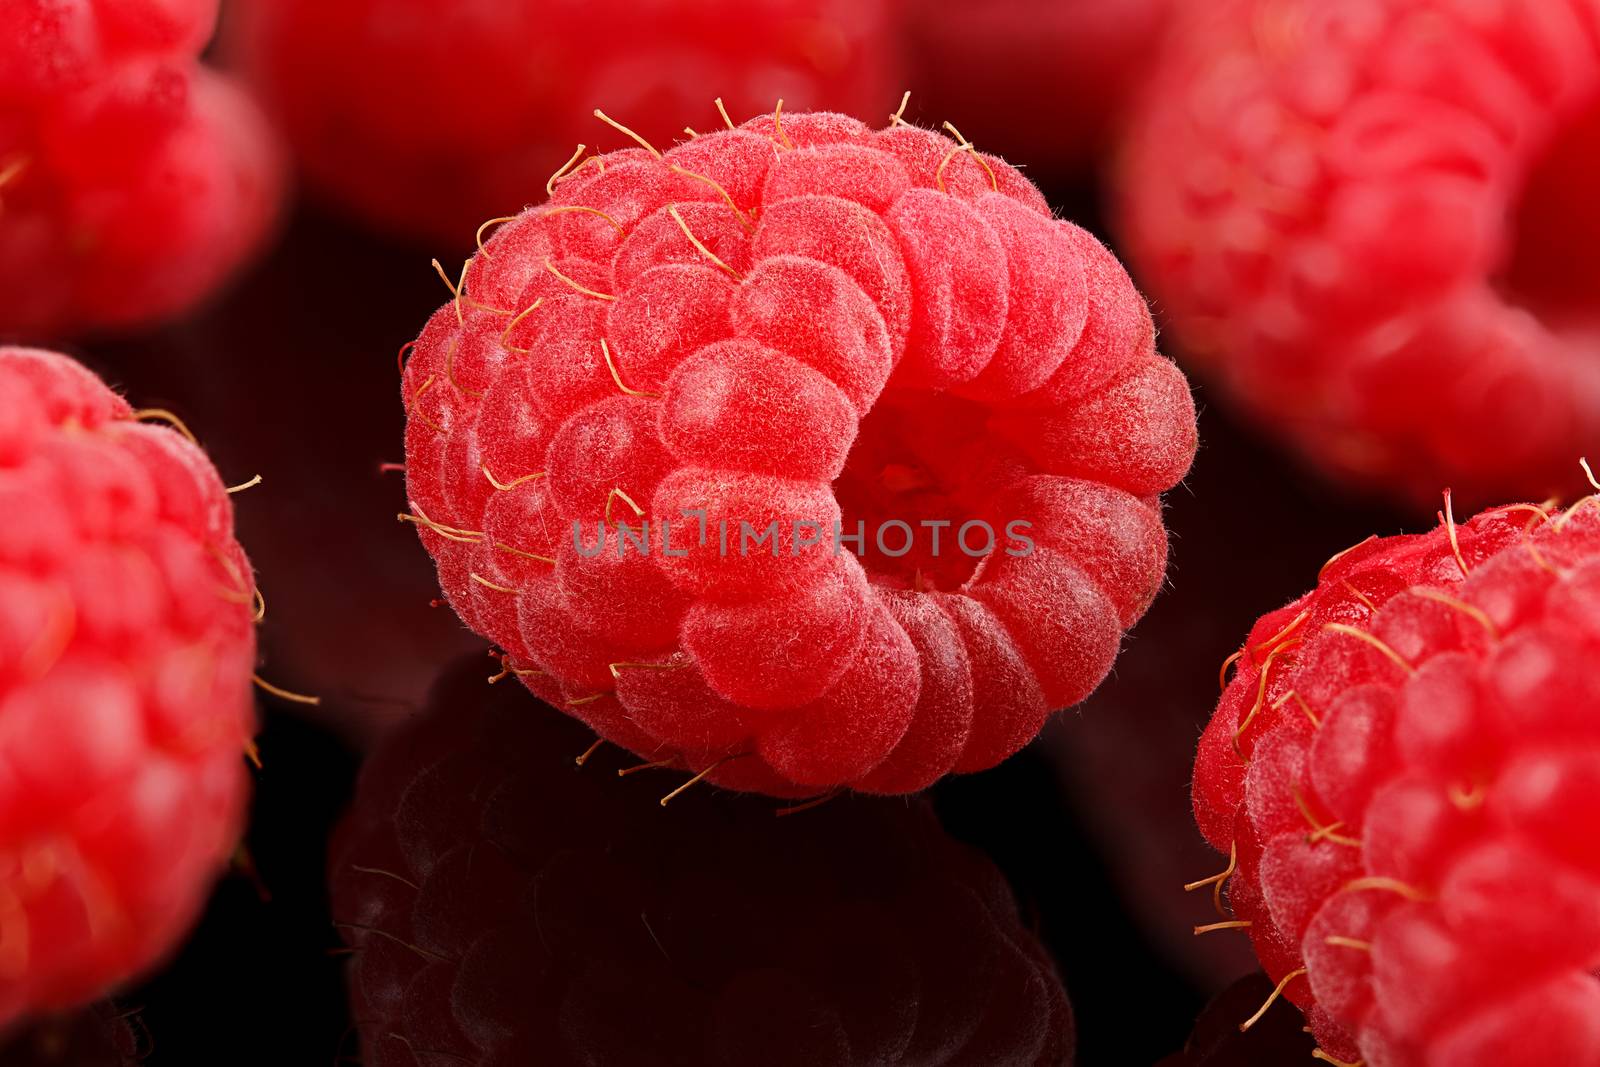 A bunch of ripe raspberries on black background.